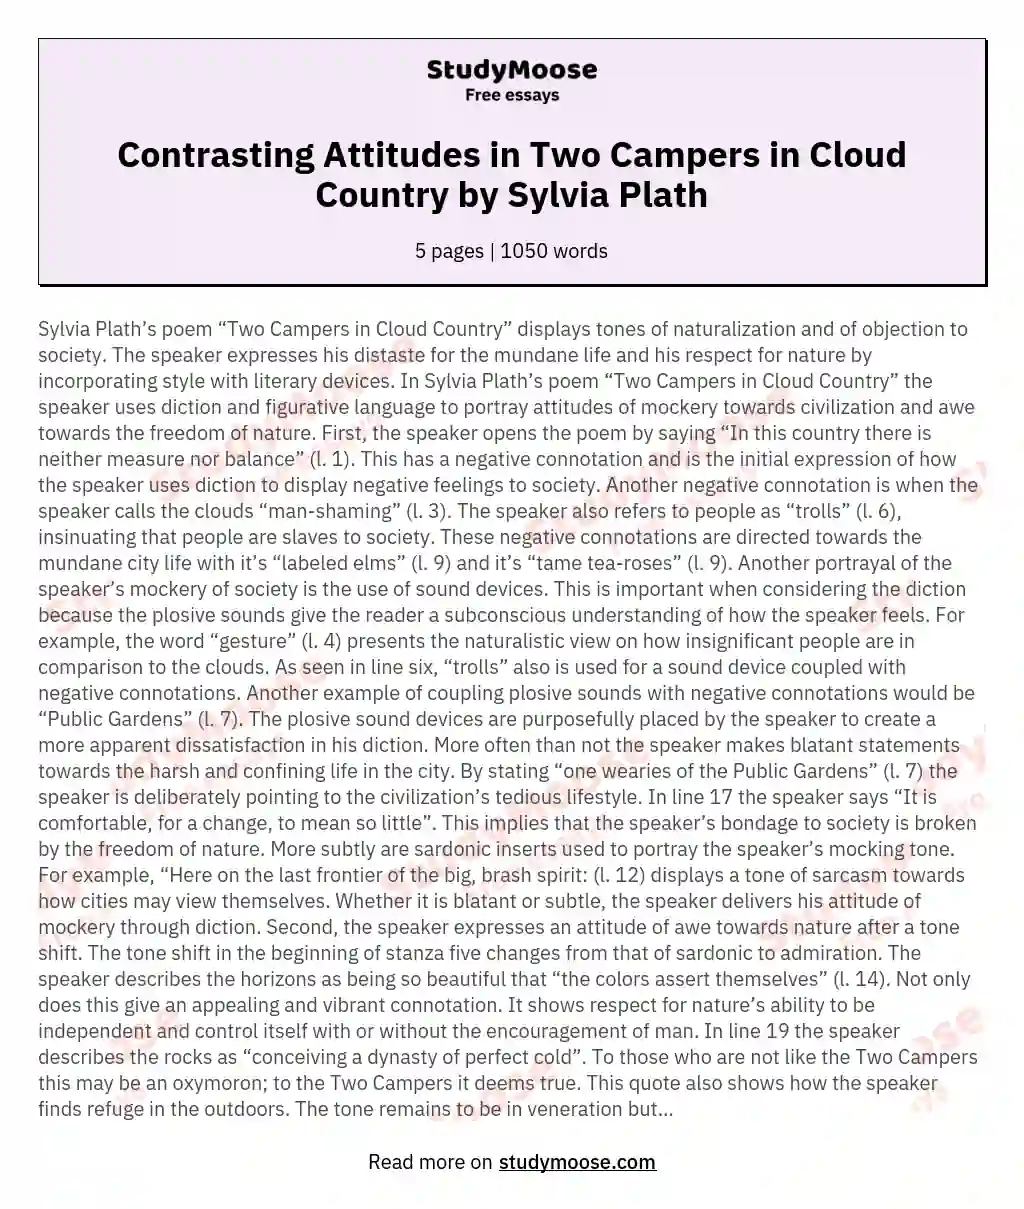 Contrasting Attitudes in Two Campers in Cloud Country by Sylvia Plath